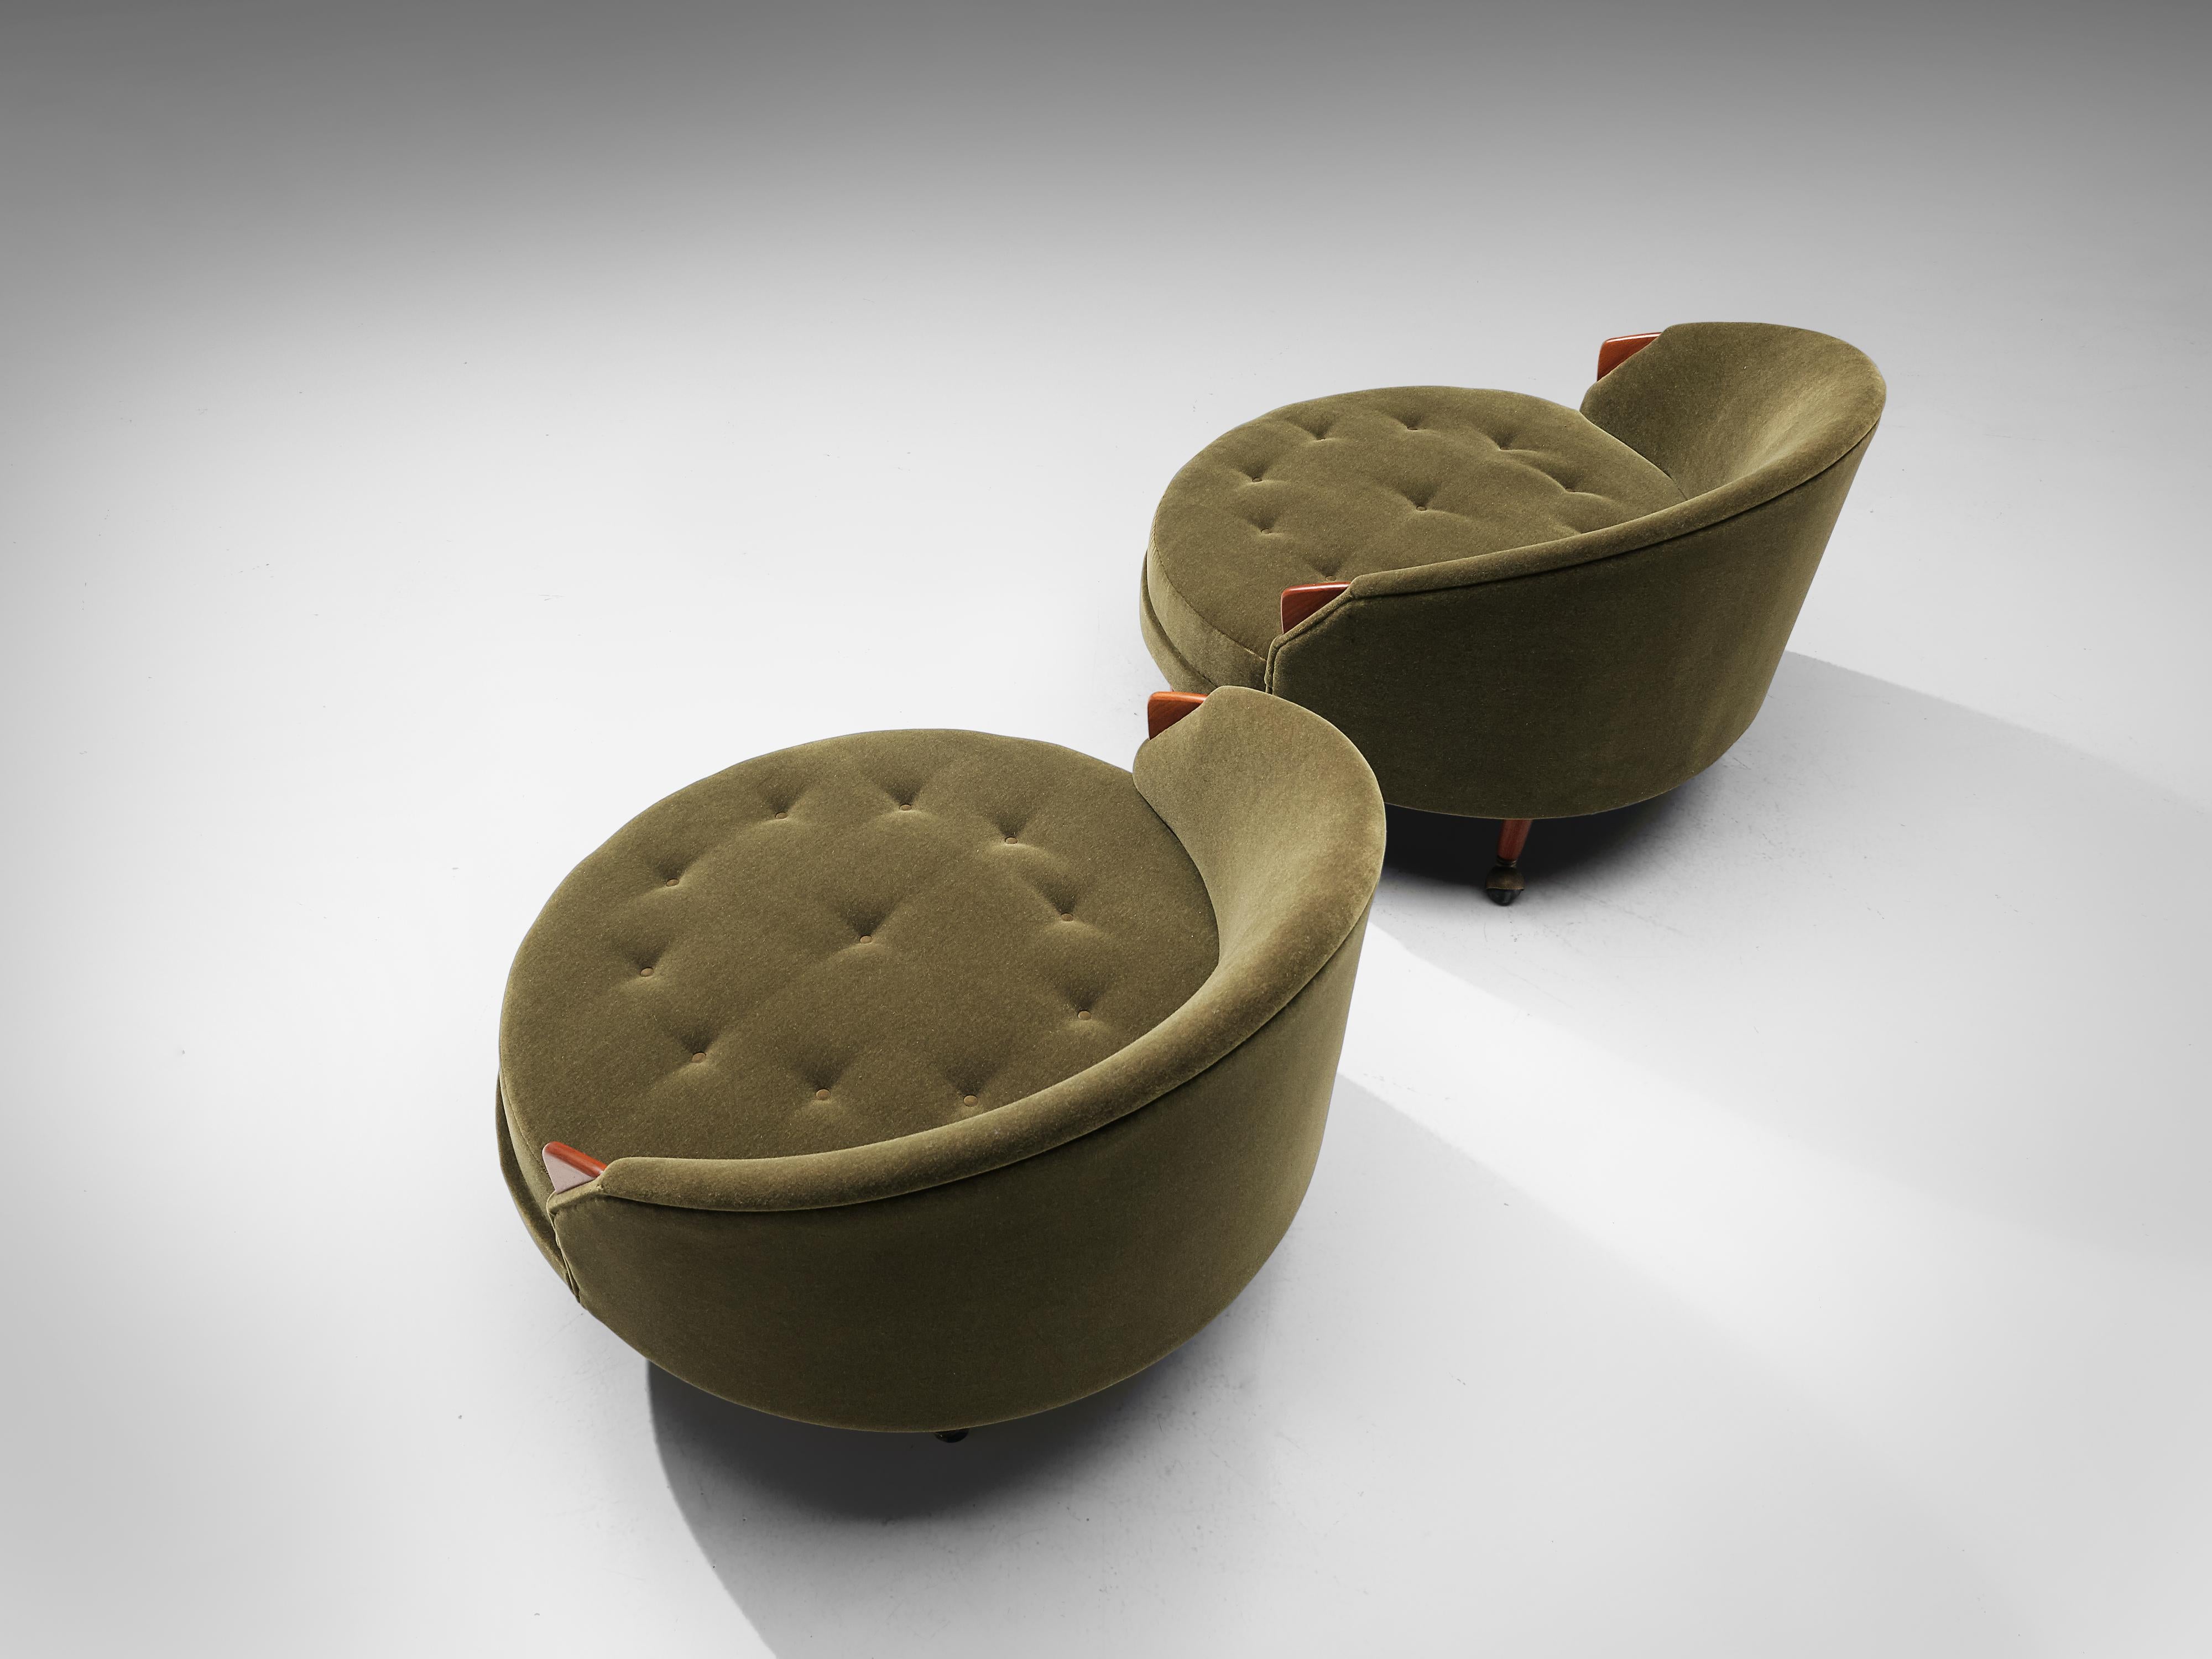 Fabric Adrian Pearsall Pair of 'Havana' Lounge Chairs in Green Pierre Frey and Walnut